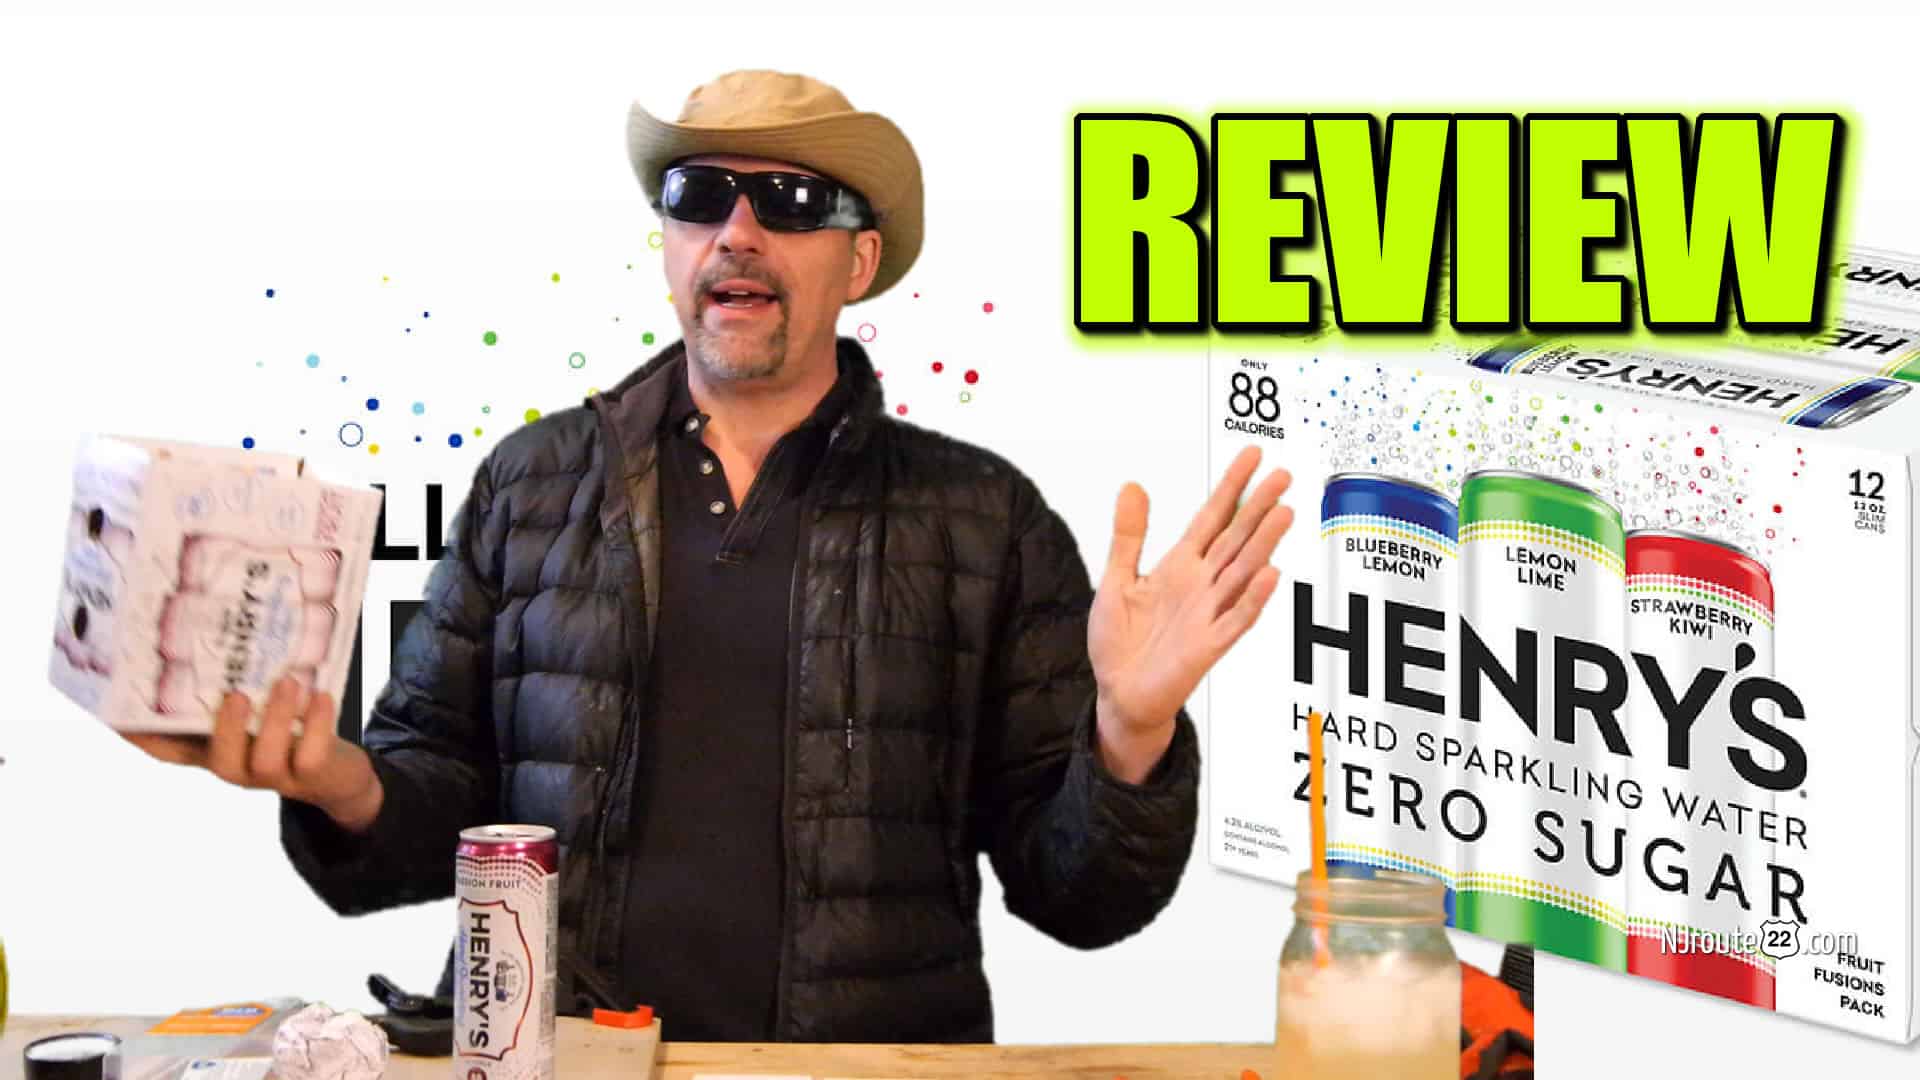 henry-s-hard-sparkling-water-review-nj-route-22